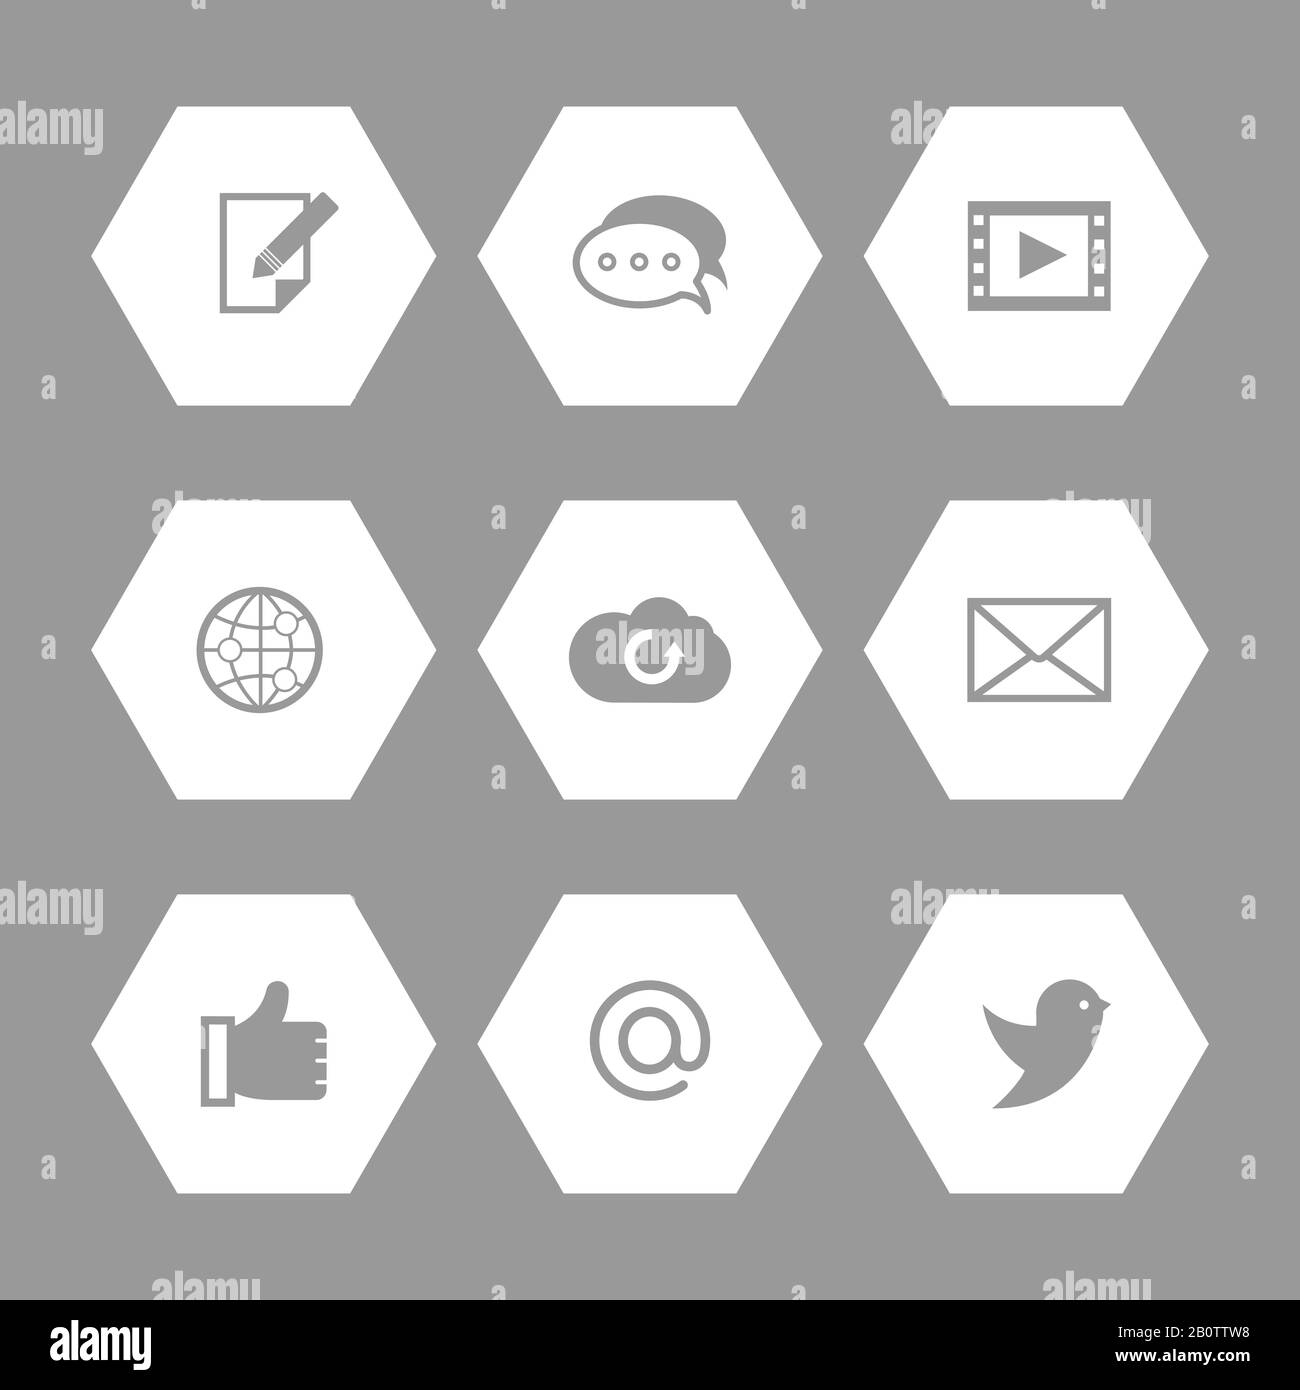 Social media and network icons set. Communication set of icons, vector illustration Stock Vector